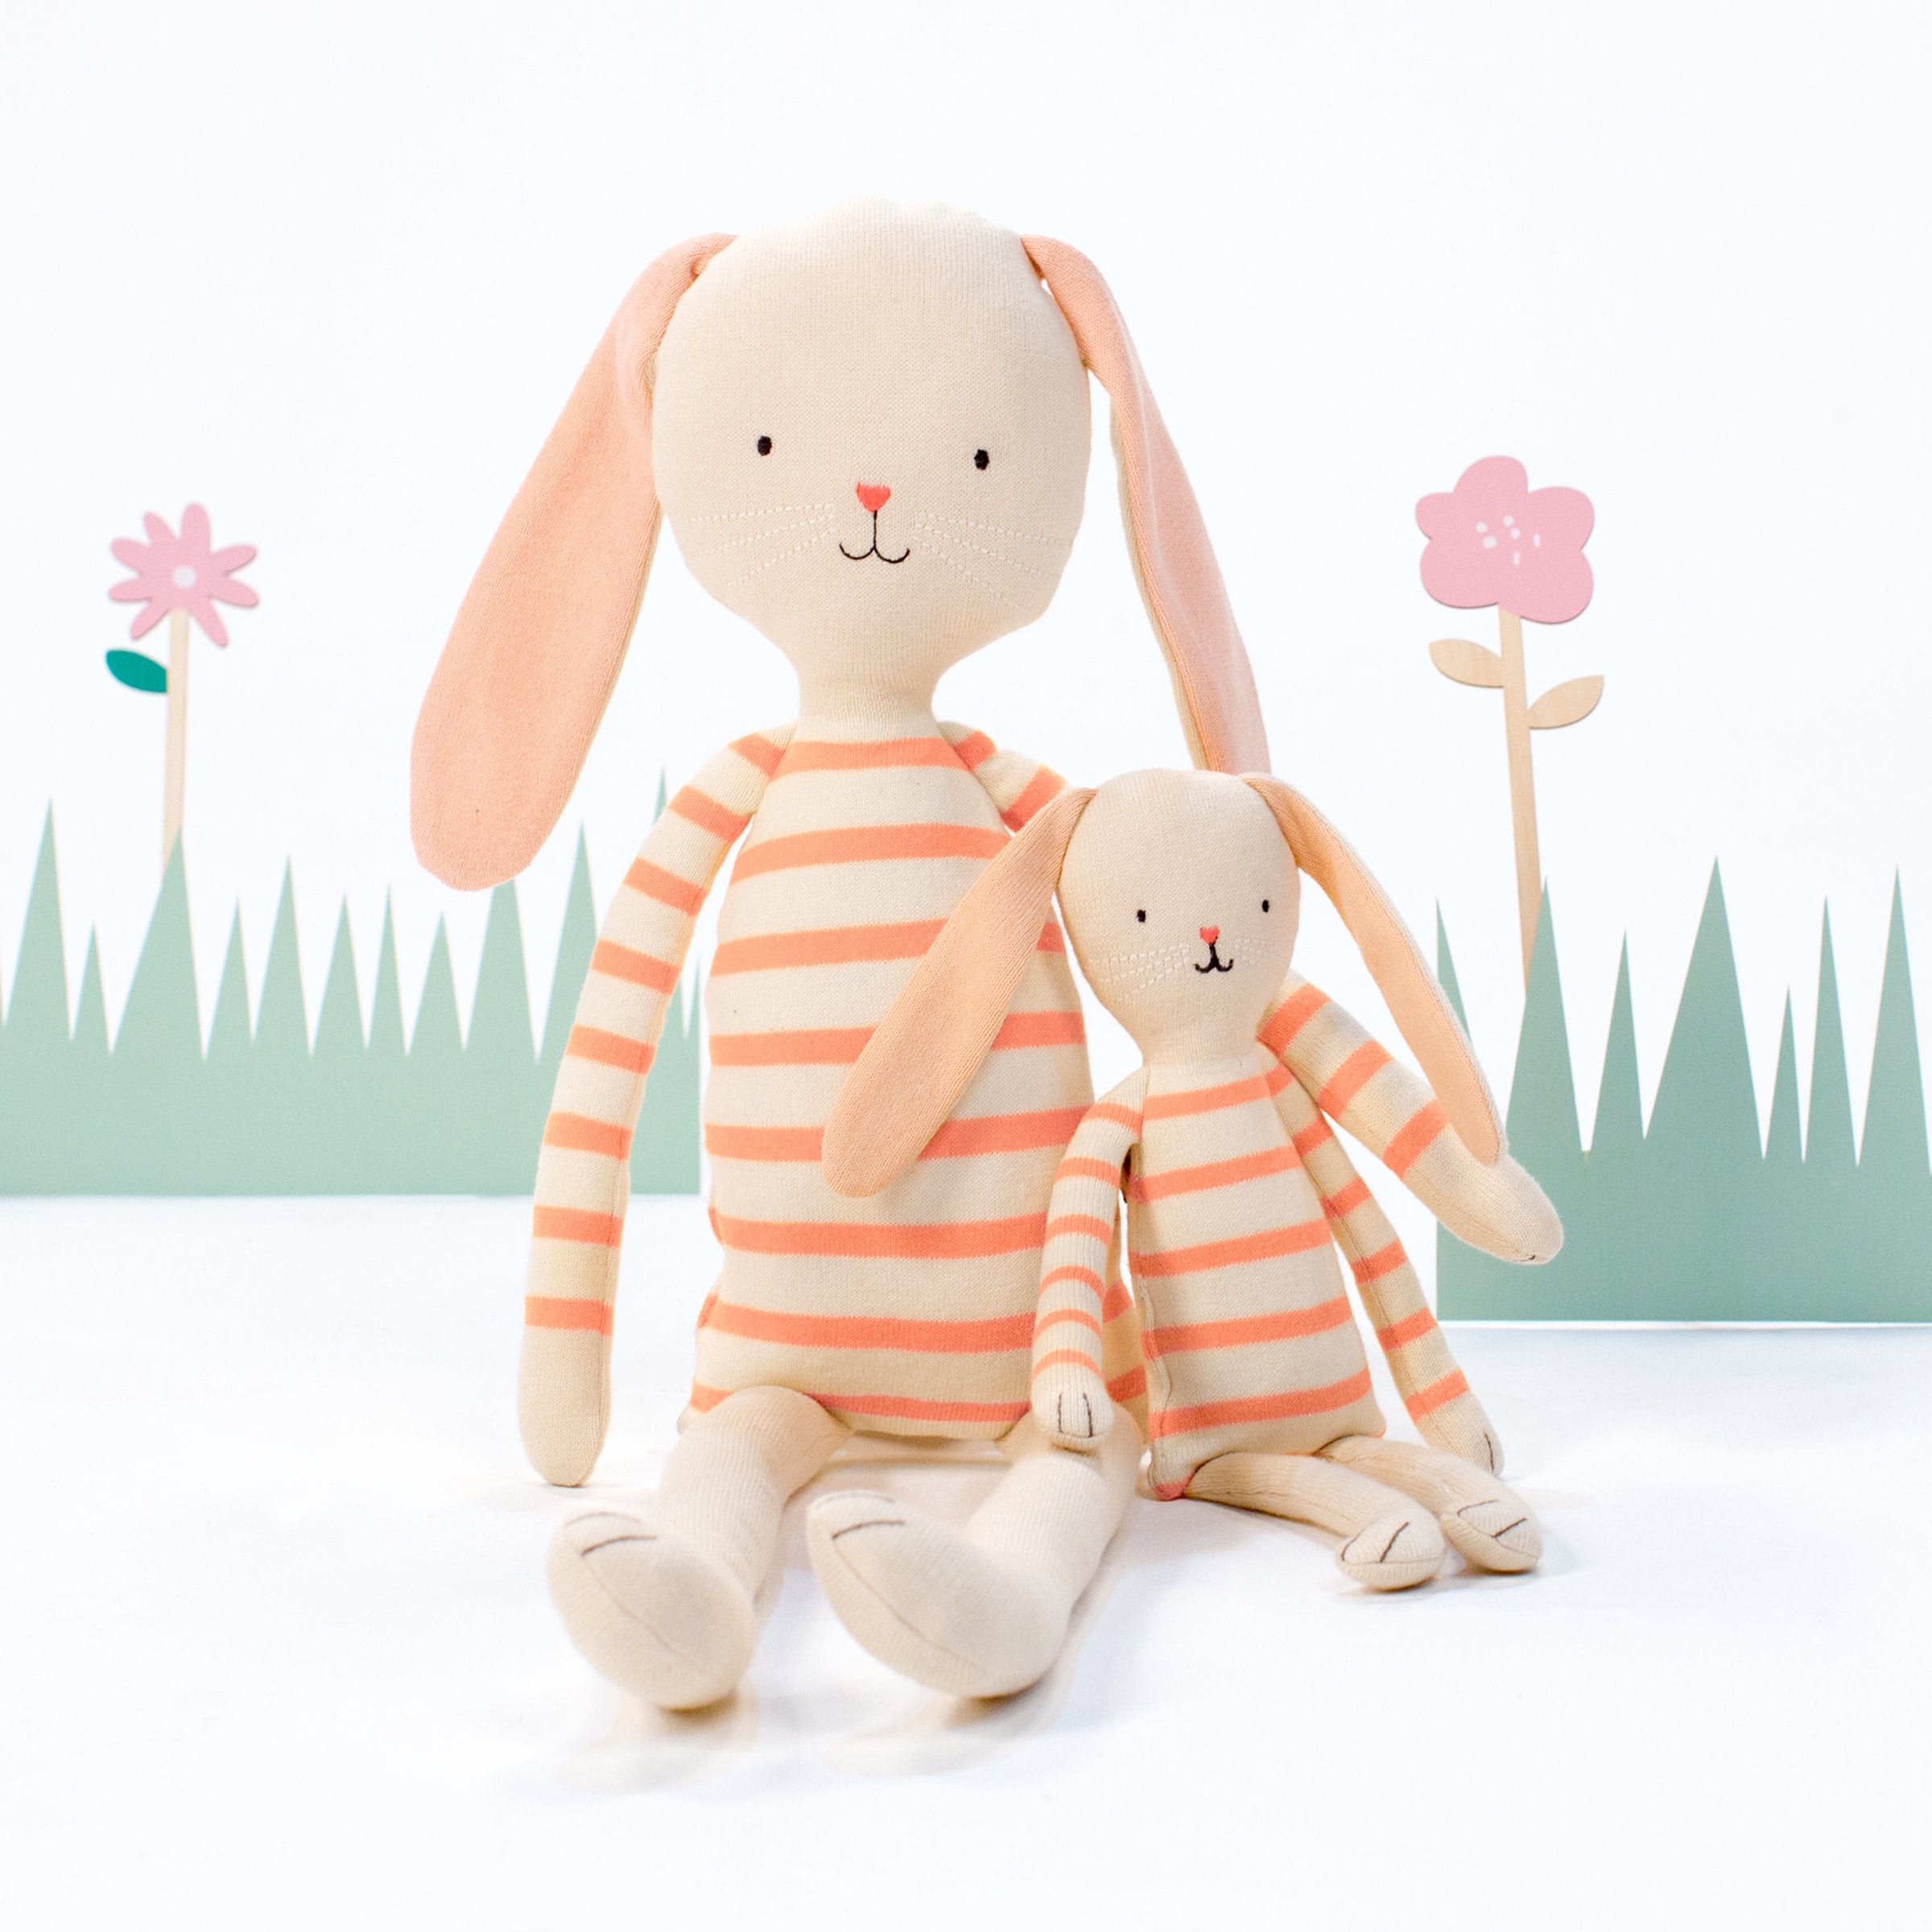 Alfalfa bunny is crafoted from knitted organic cotton, with floppy ears, a pompom tail and sweet stitched features.